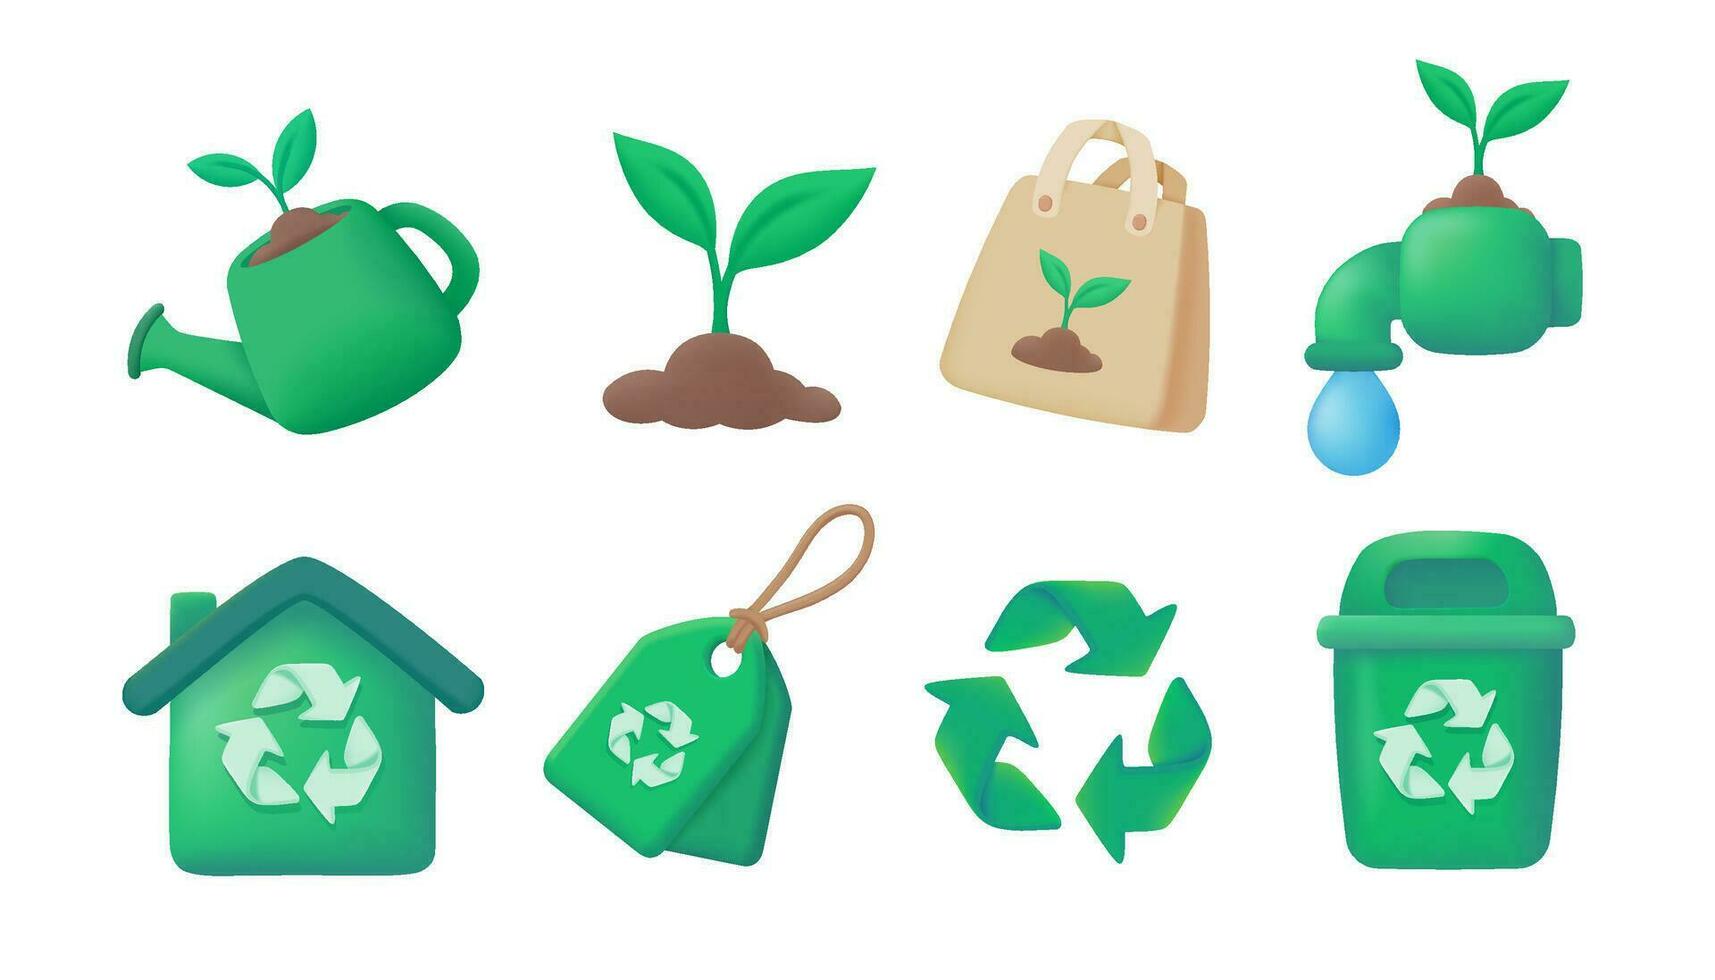 Planting trees and using recycled materials helps reduce waste in the world. 3D vector illustration